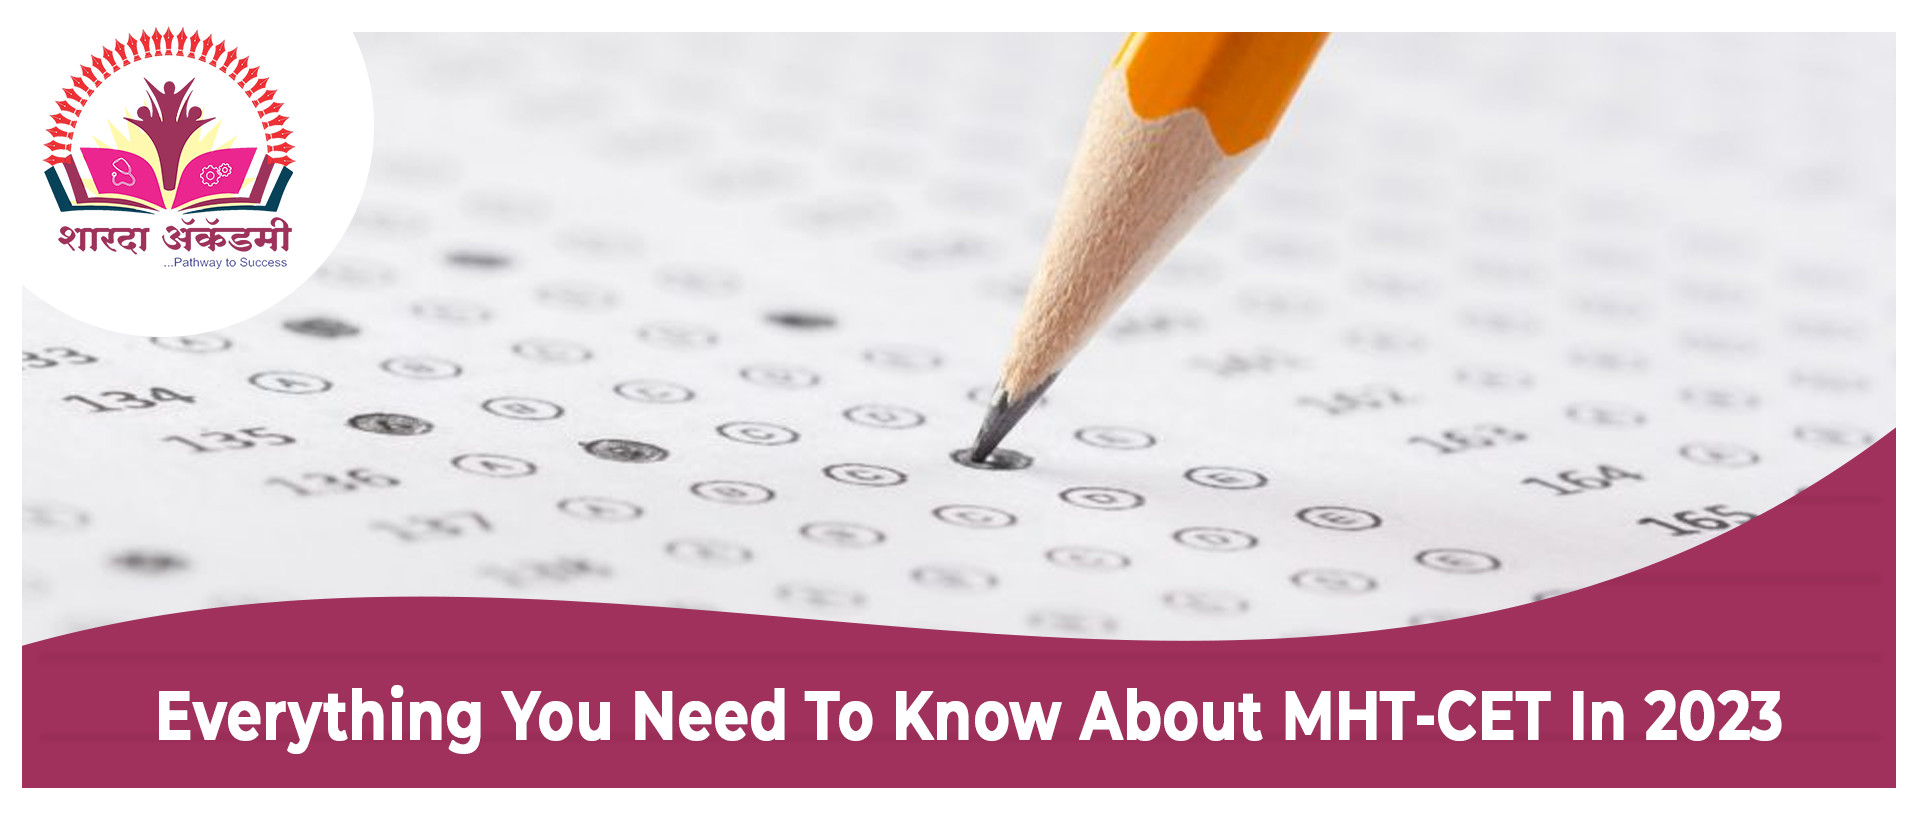 Everything You Need to Know About MHT-CET in 2023